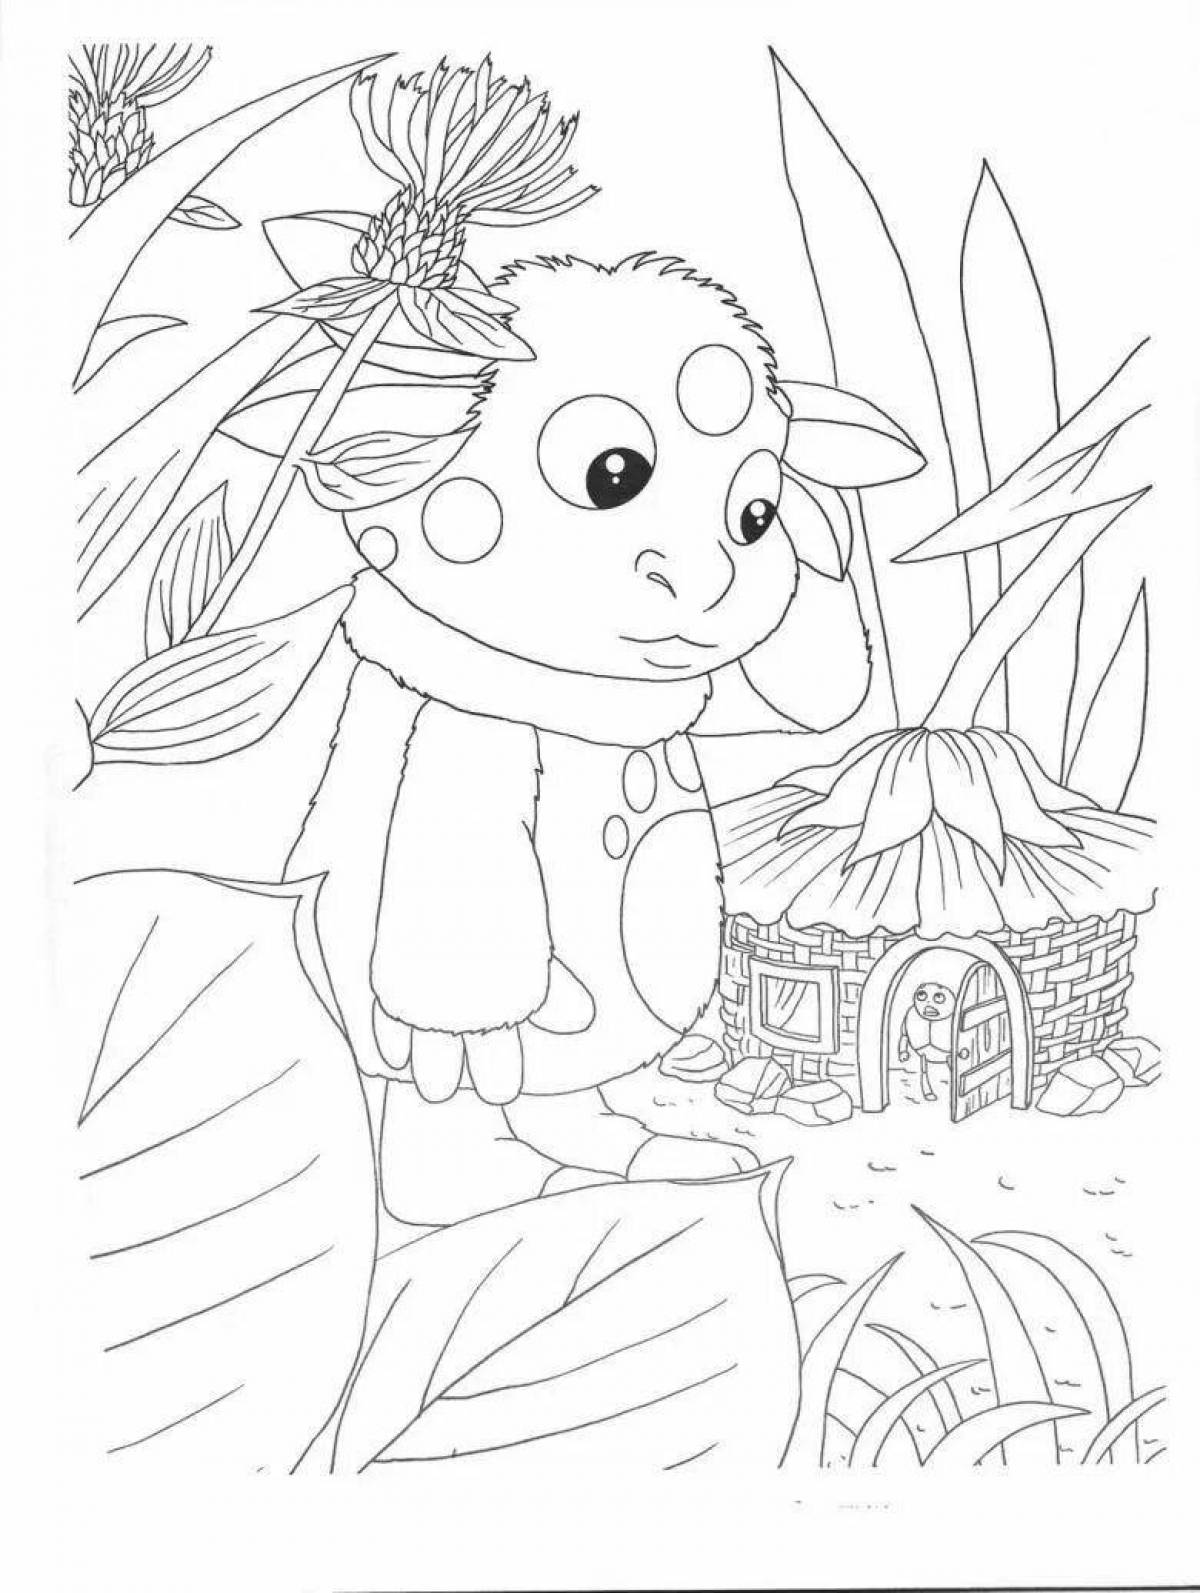 Clear Luntik coloring page